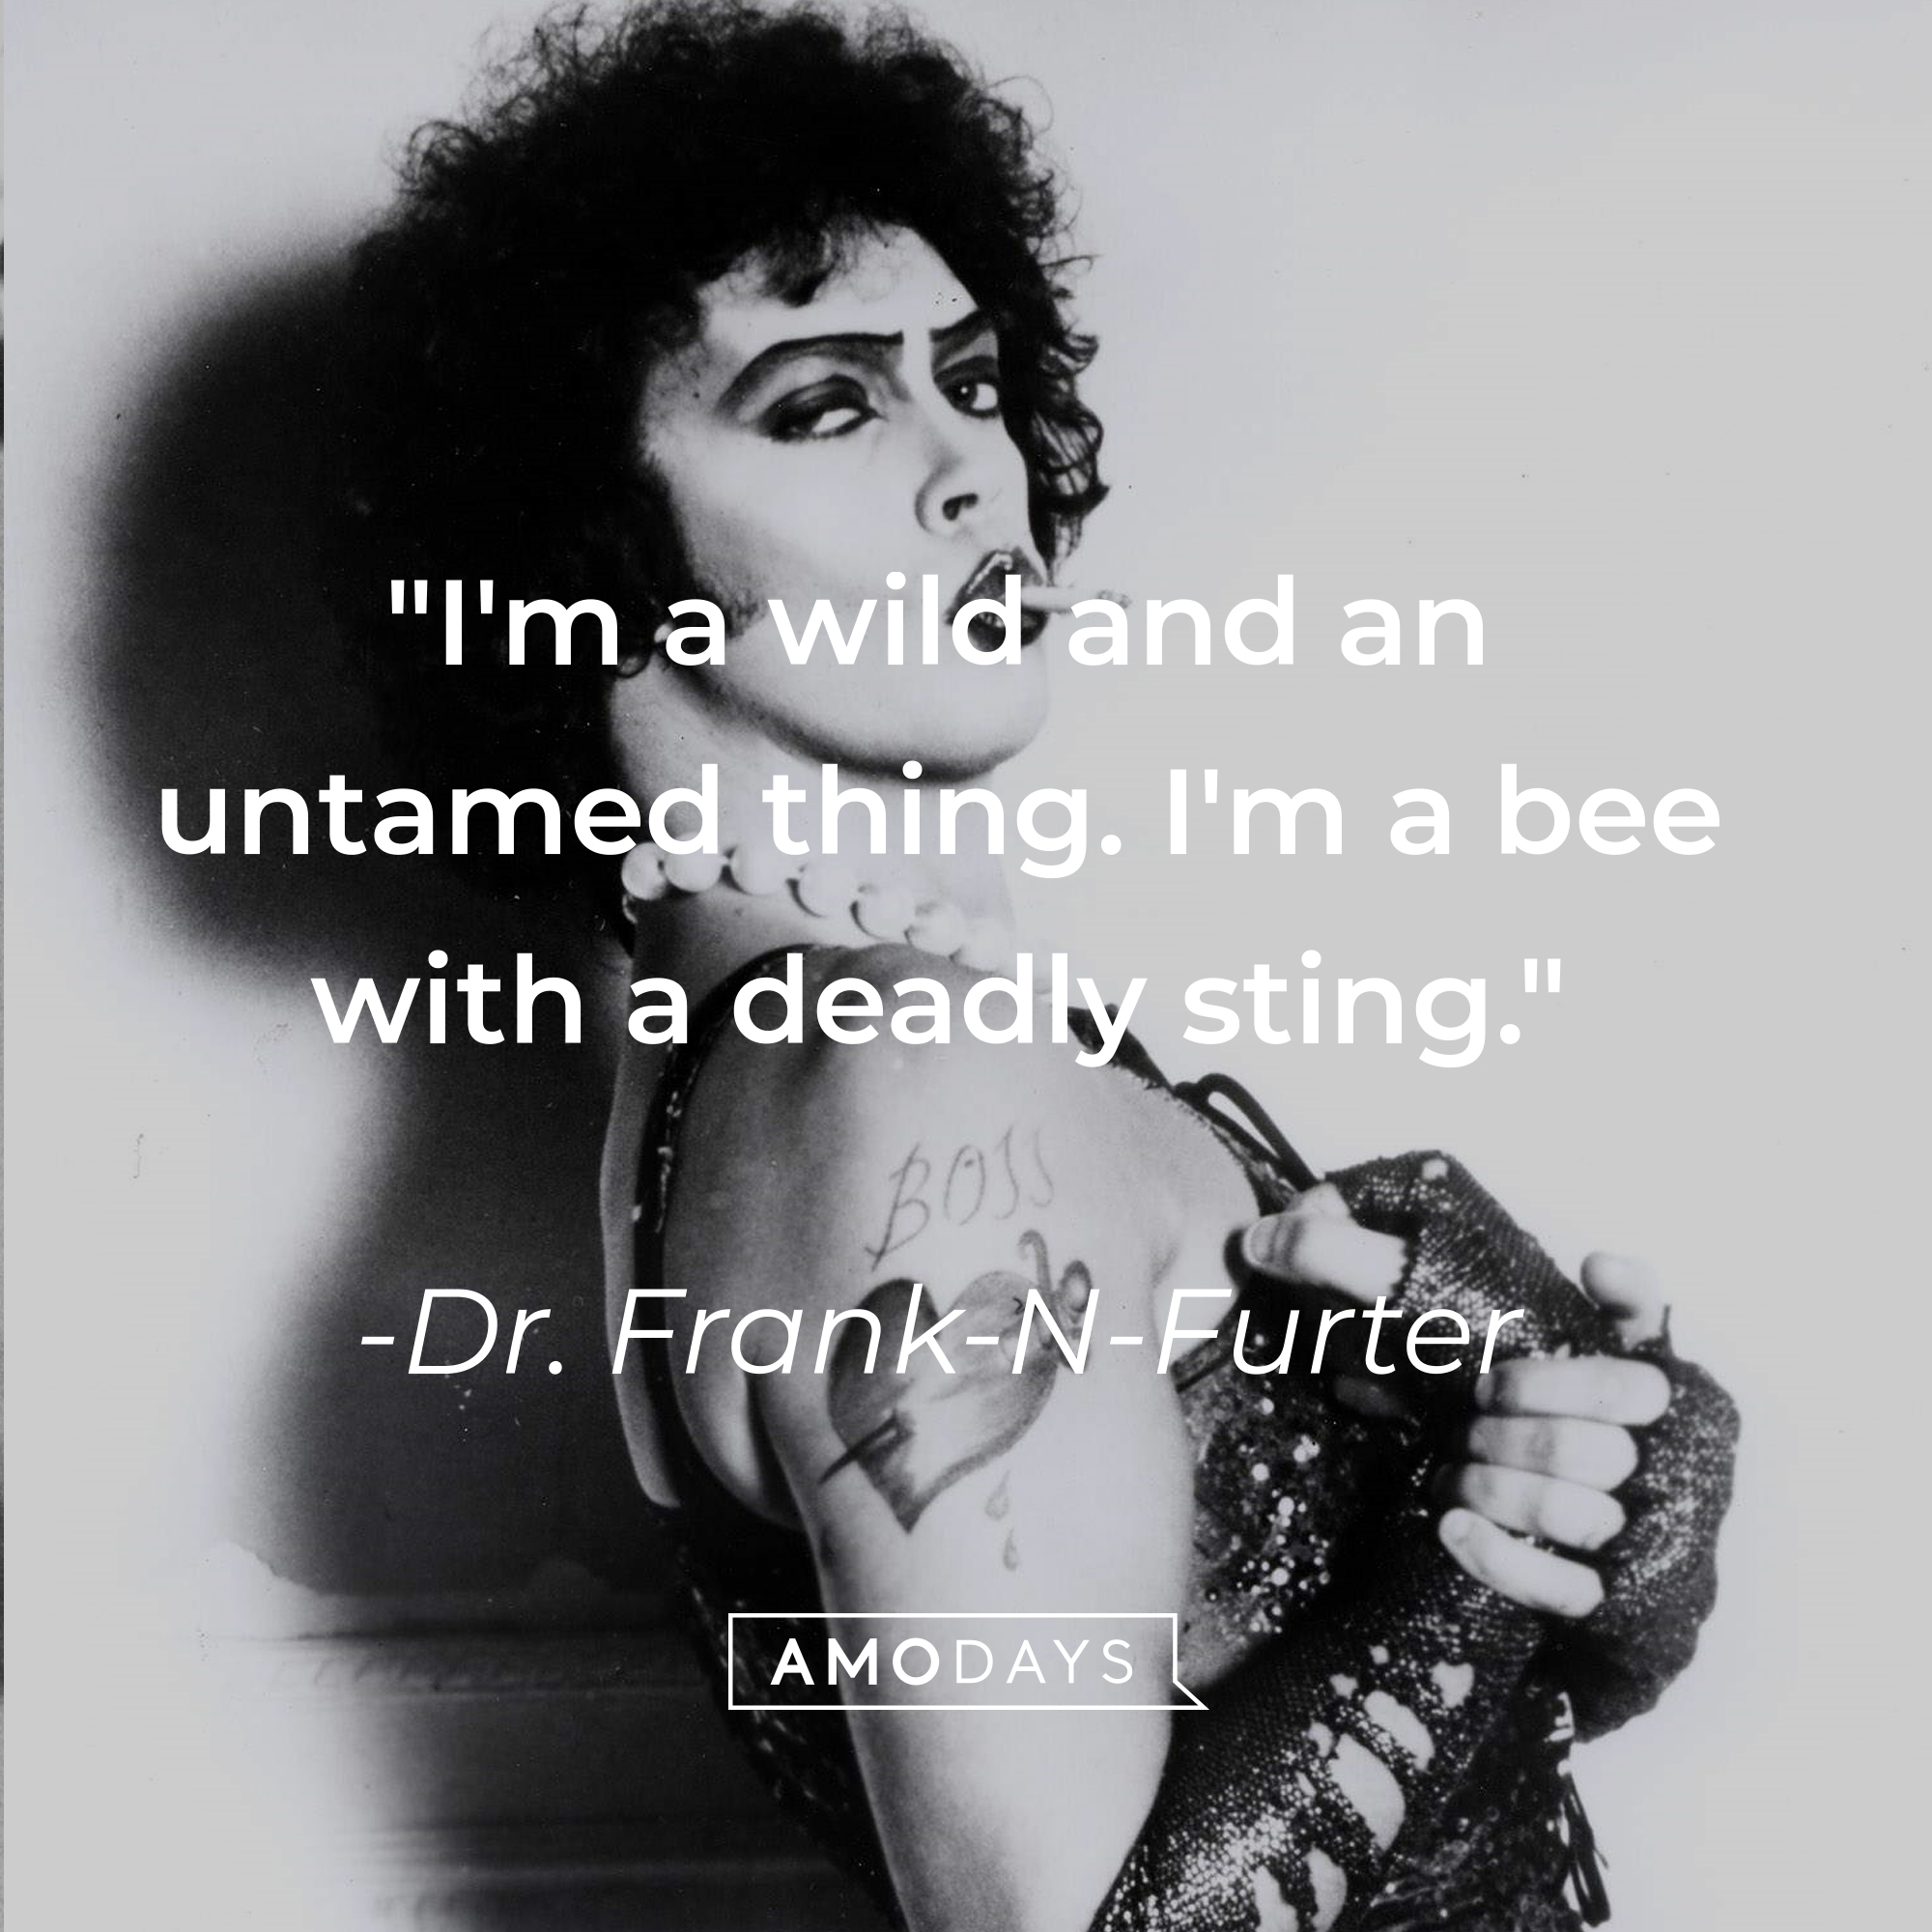 Dr. Frank-N-Furter's quote: "I'm a wild and an untamed thing. I'm a bee with a deadly sting."  | Source: Facebook/TheRockyHorrorPictureShowOfficial